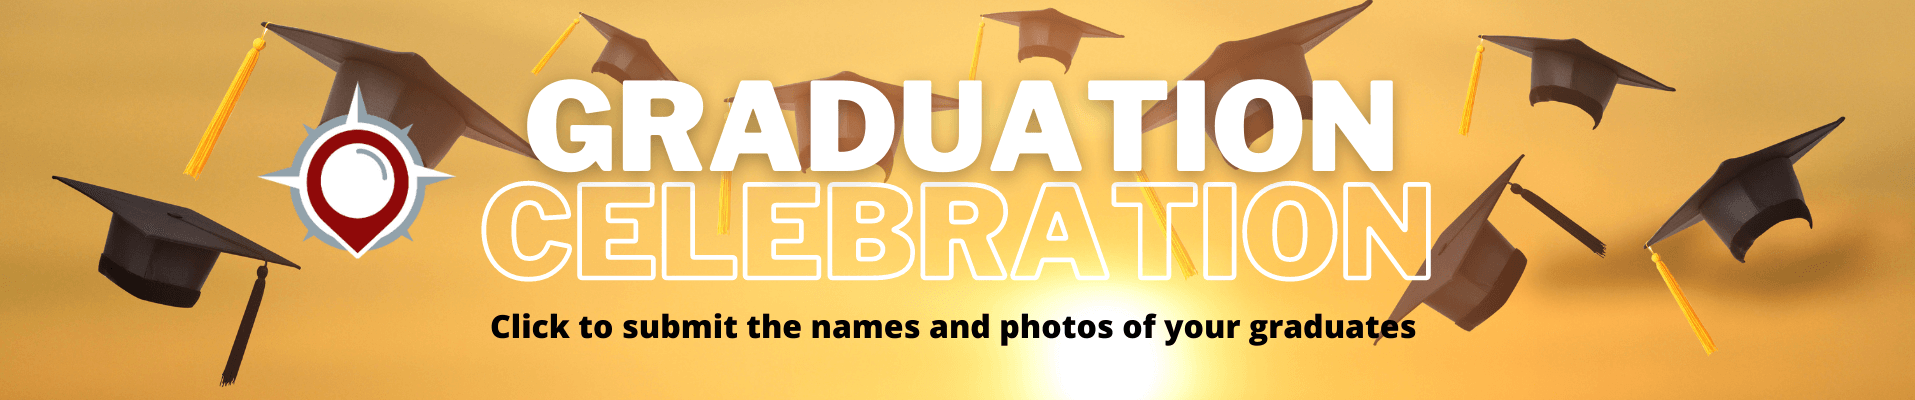 Graduation Celebration - Click to submit names and photos